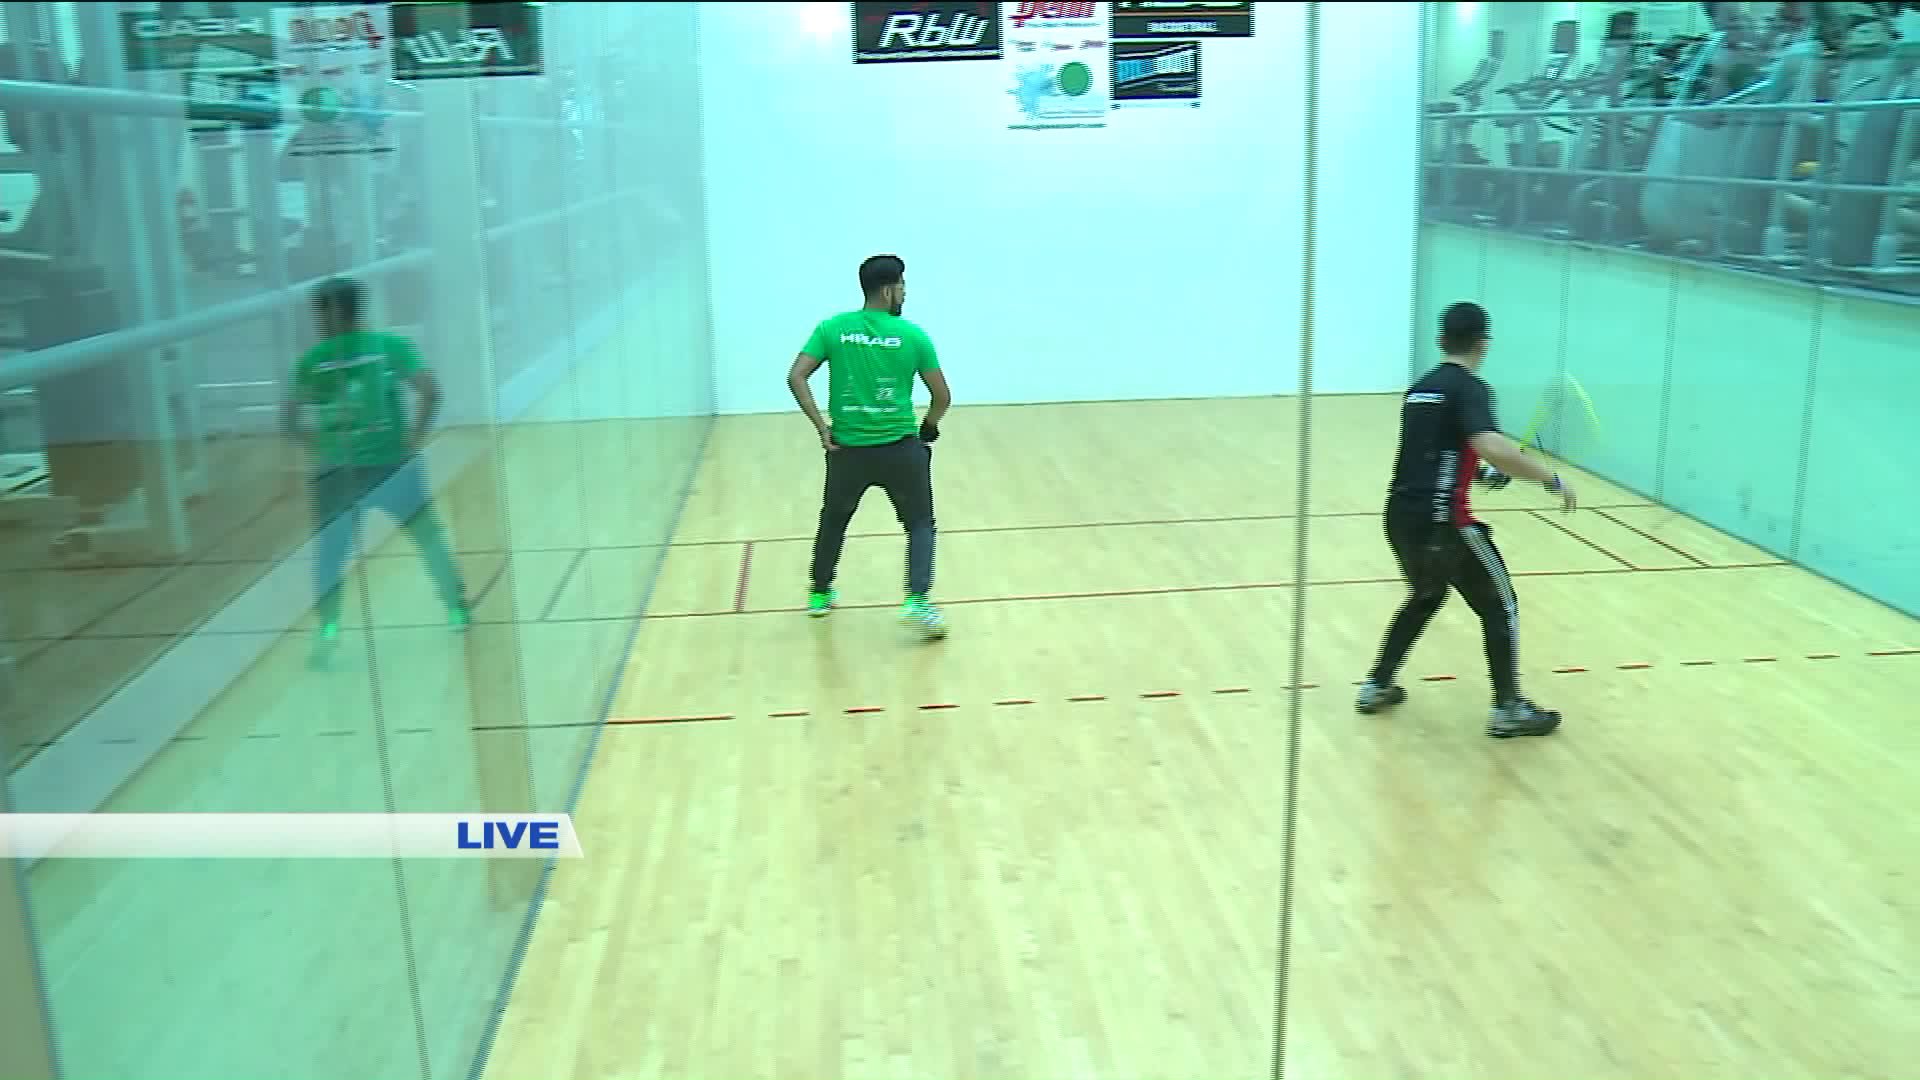 WGN reporter tries to learn racquetball in Lombard